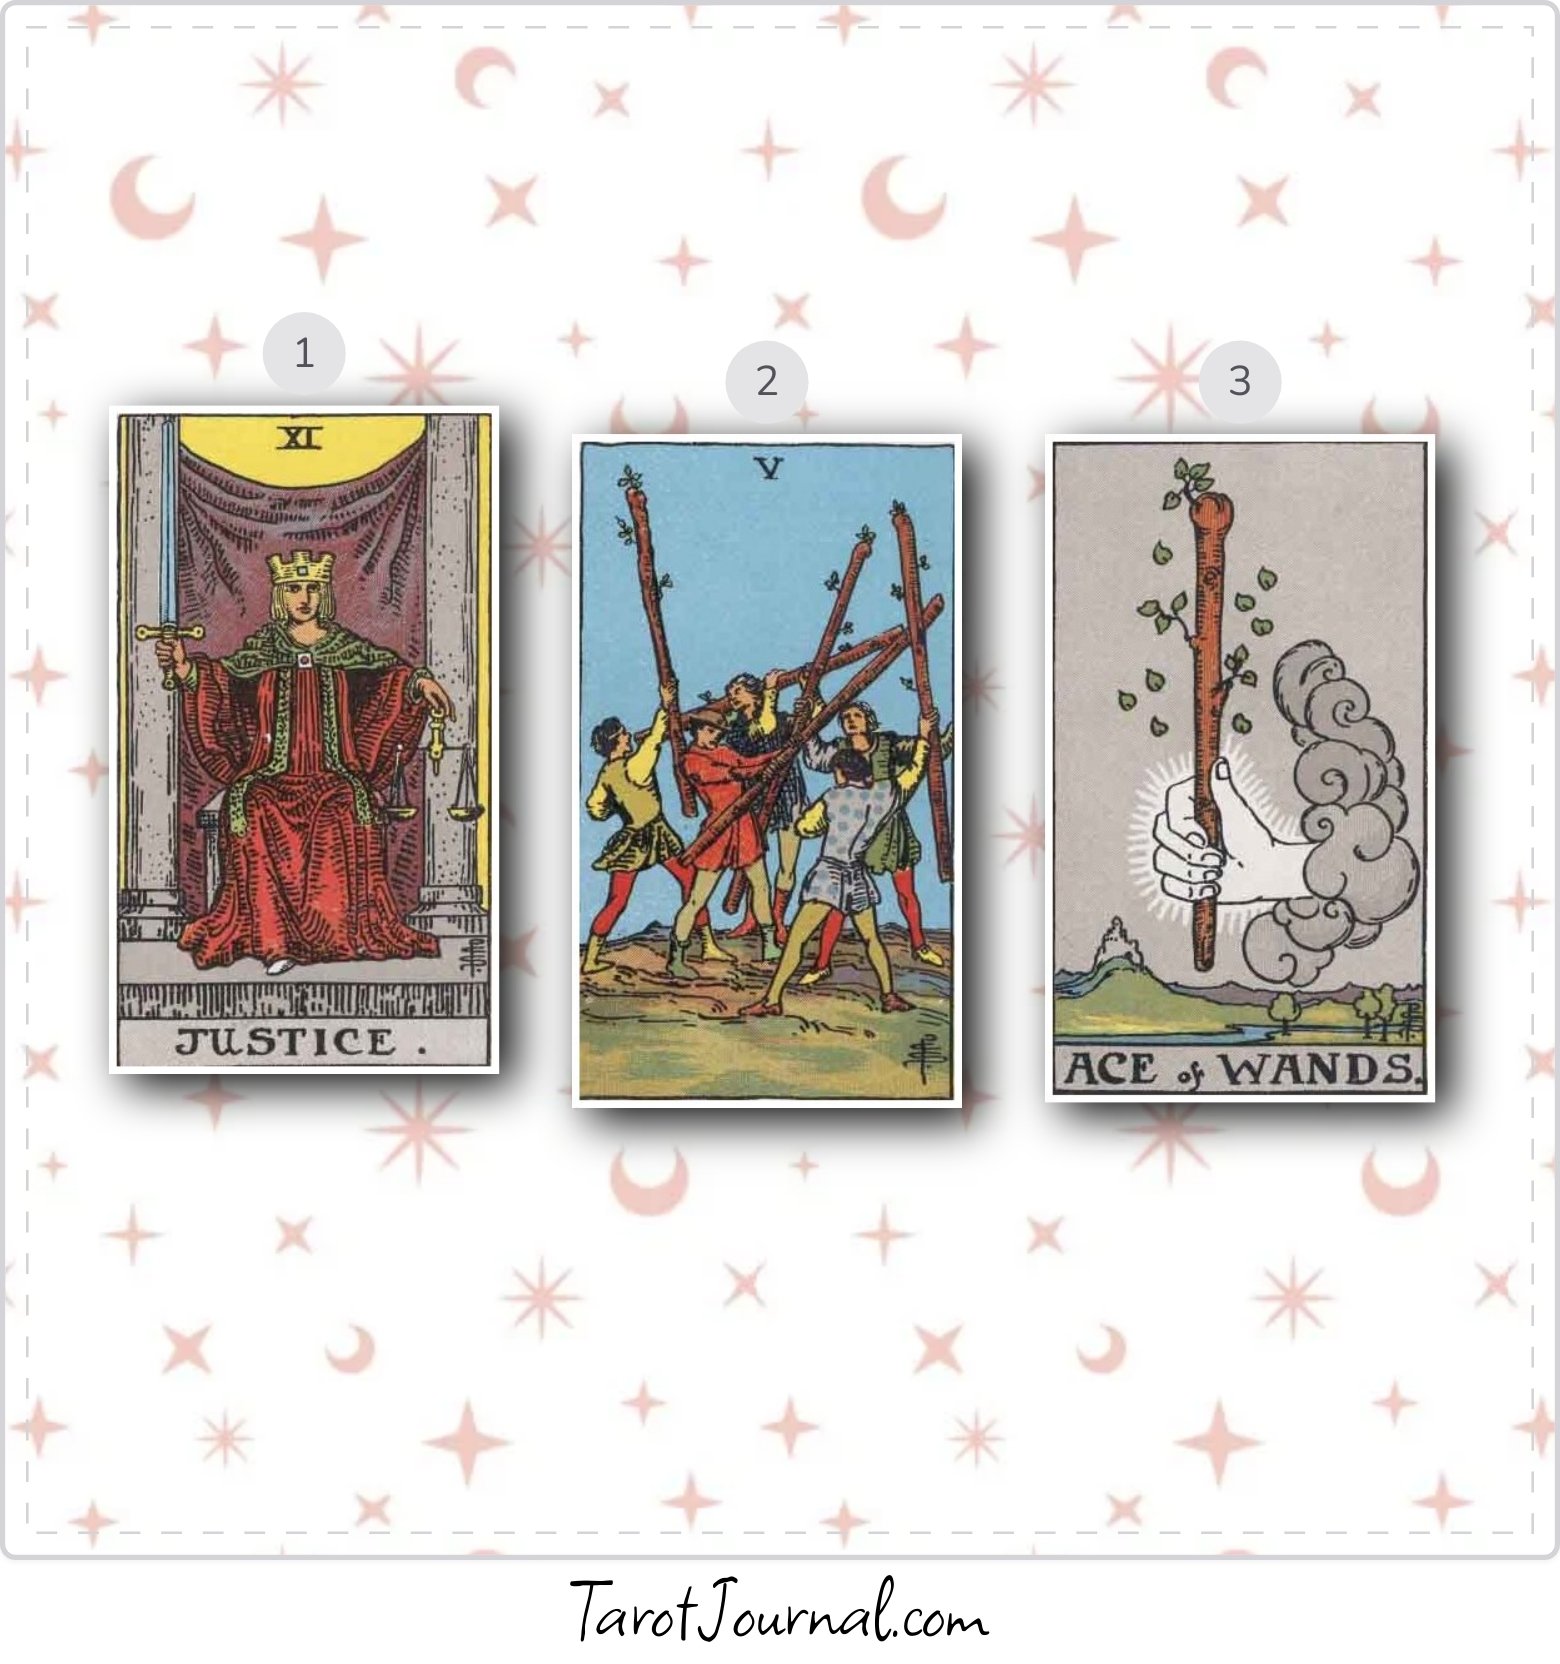 What do I need to know for the upcoming weekend - tarot reading by Elizabeth